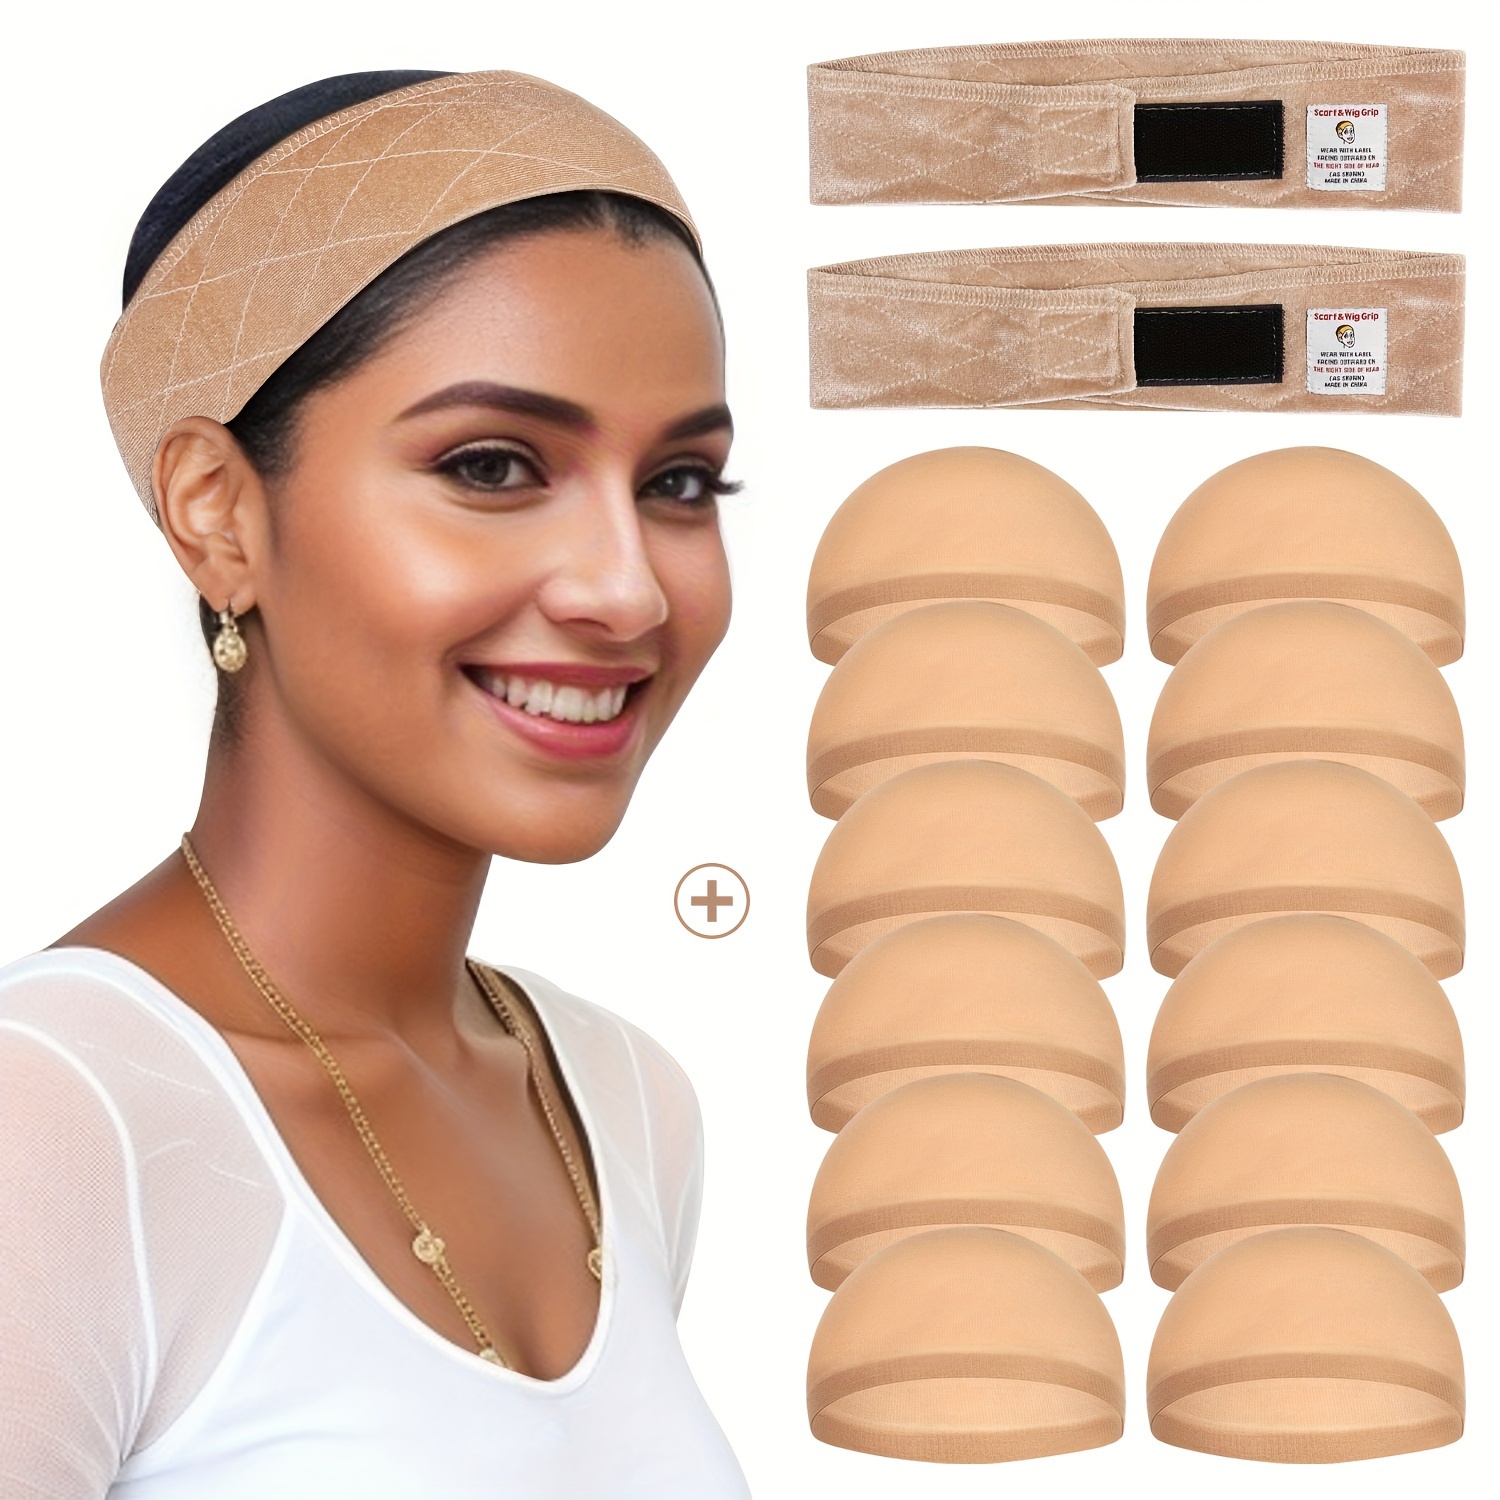 THREN 1/5/10PCS Silicone Headband Non Slip Wigs Hold Transparent Band  Elastic Soft Silicon Wig Grip Top Silicone Wig Grip Band 